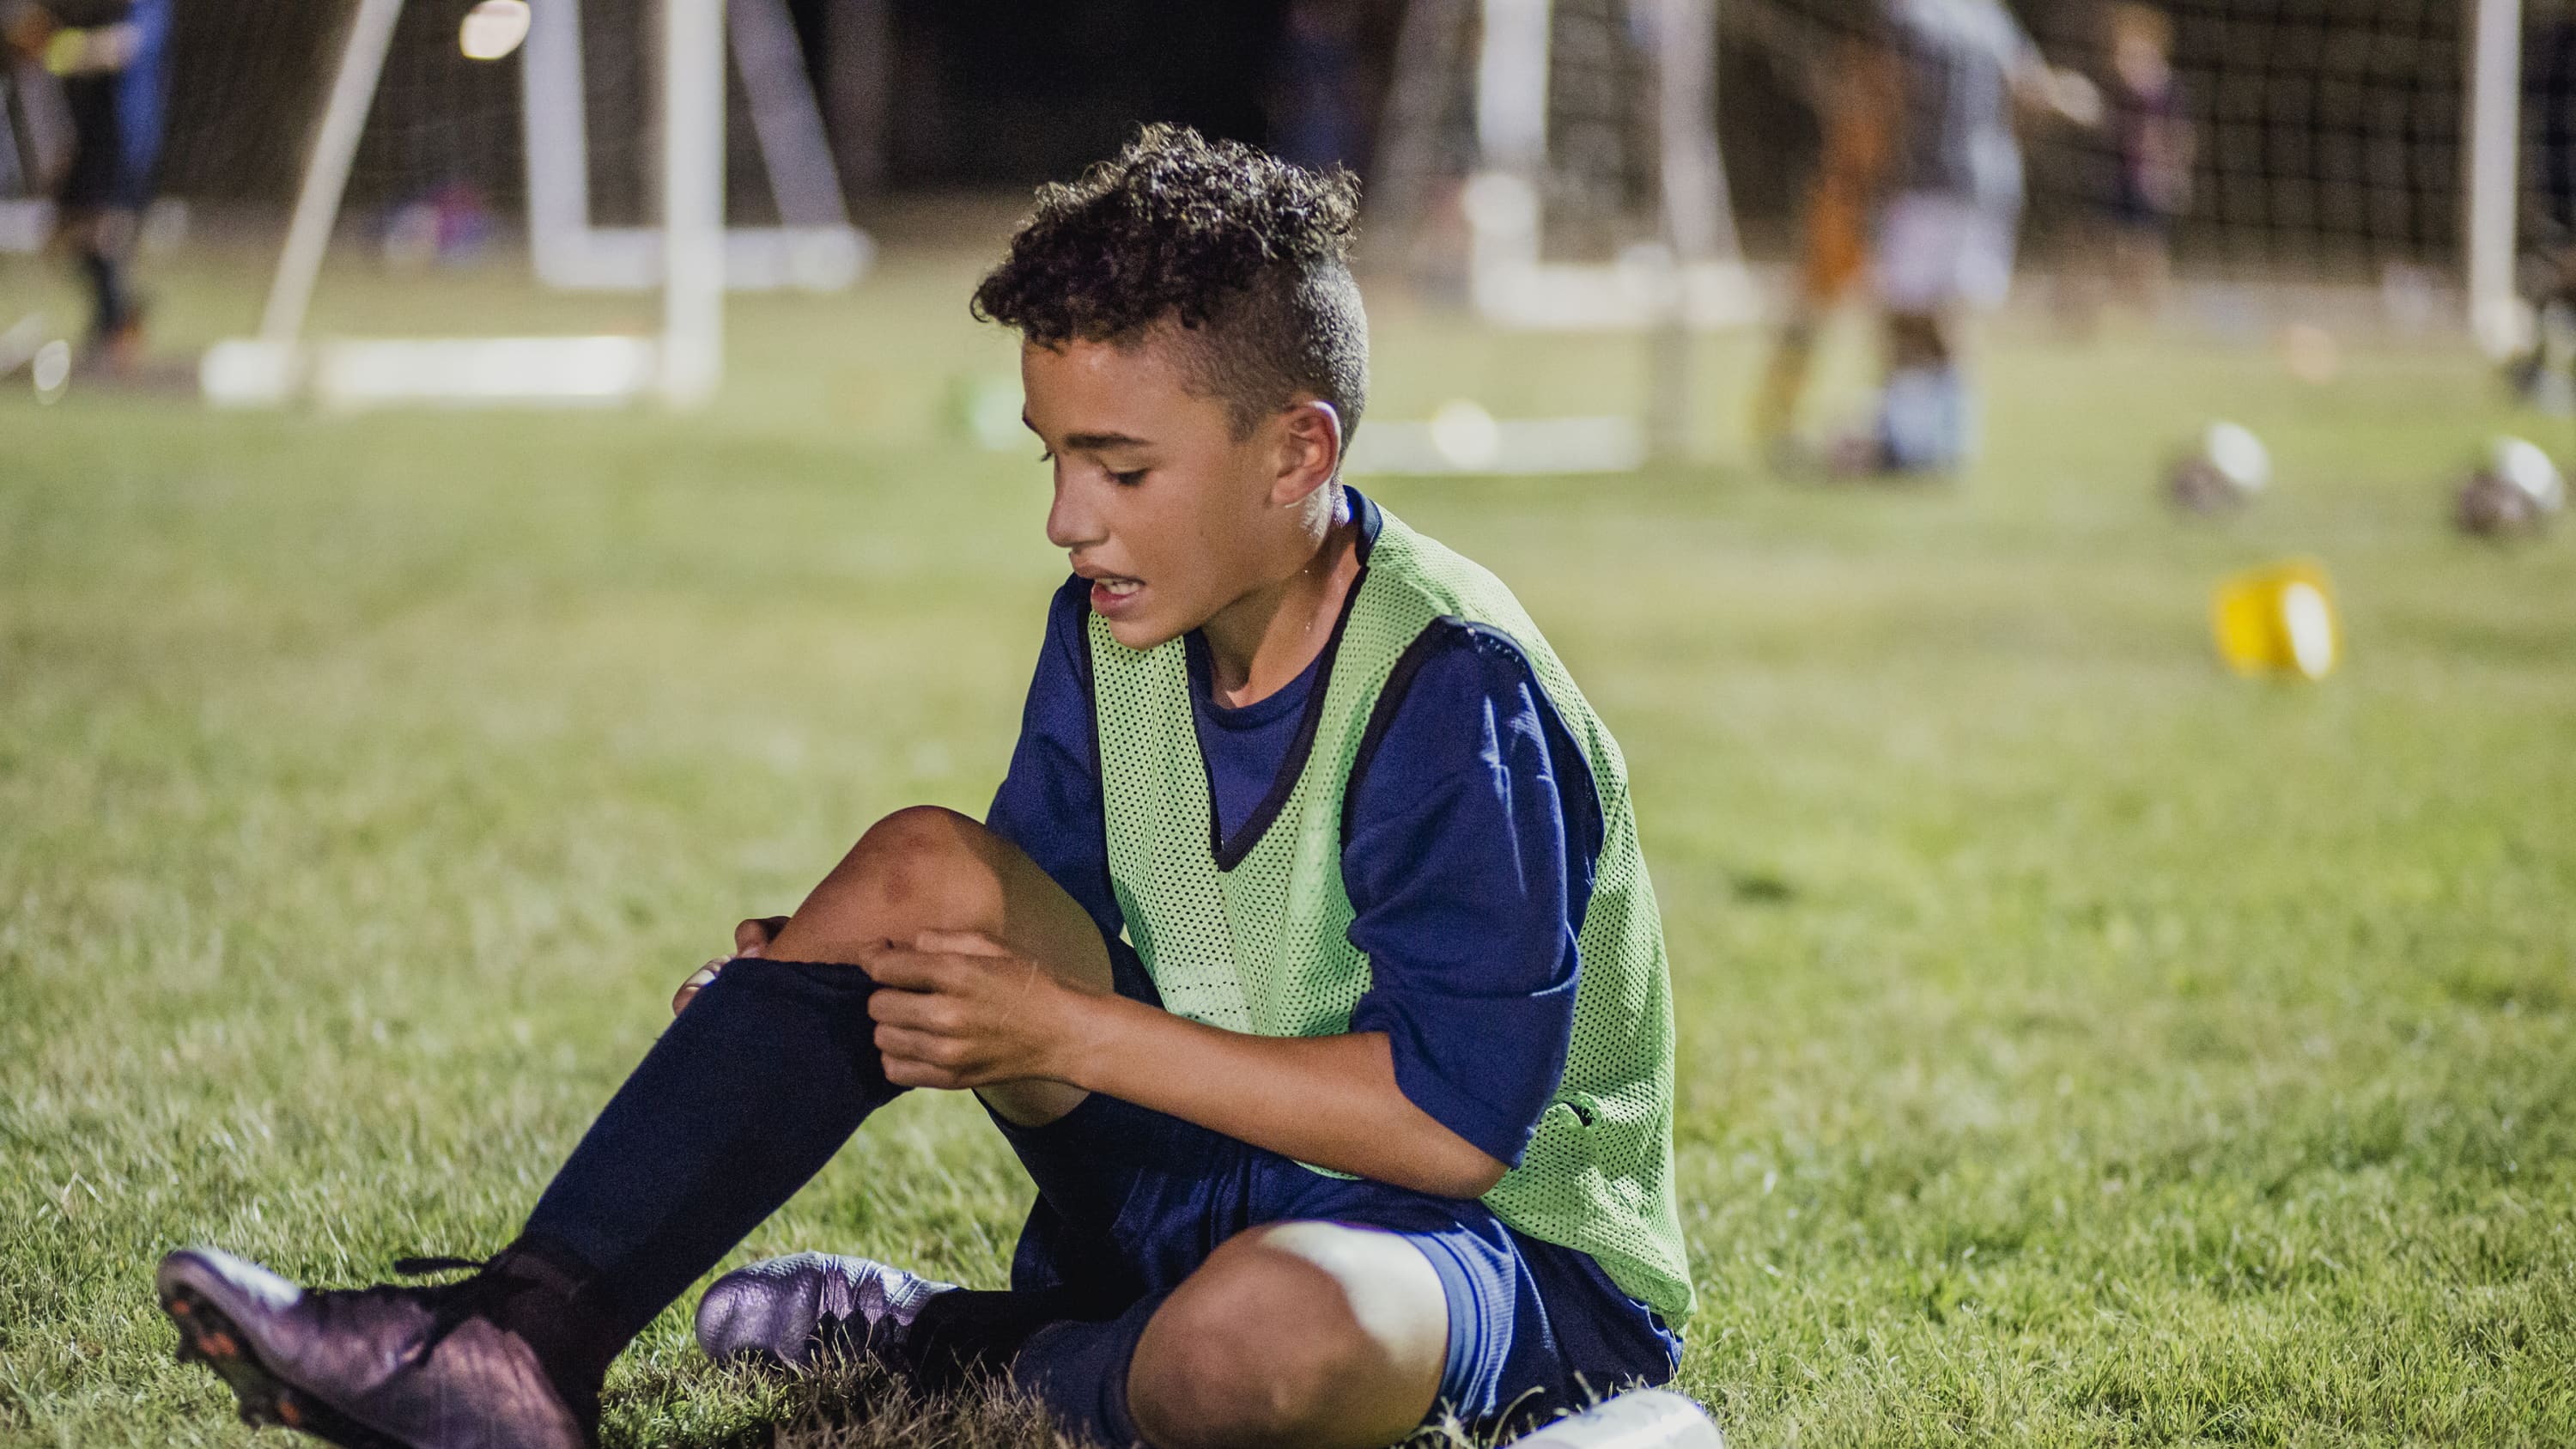 A boy injures himself, with possibly a growth plate injury, playing soccer.